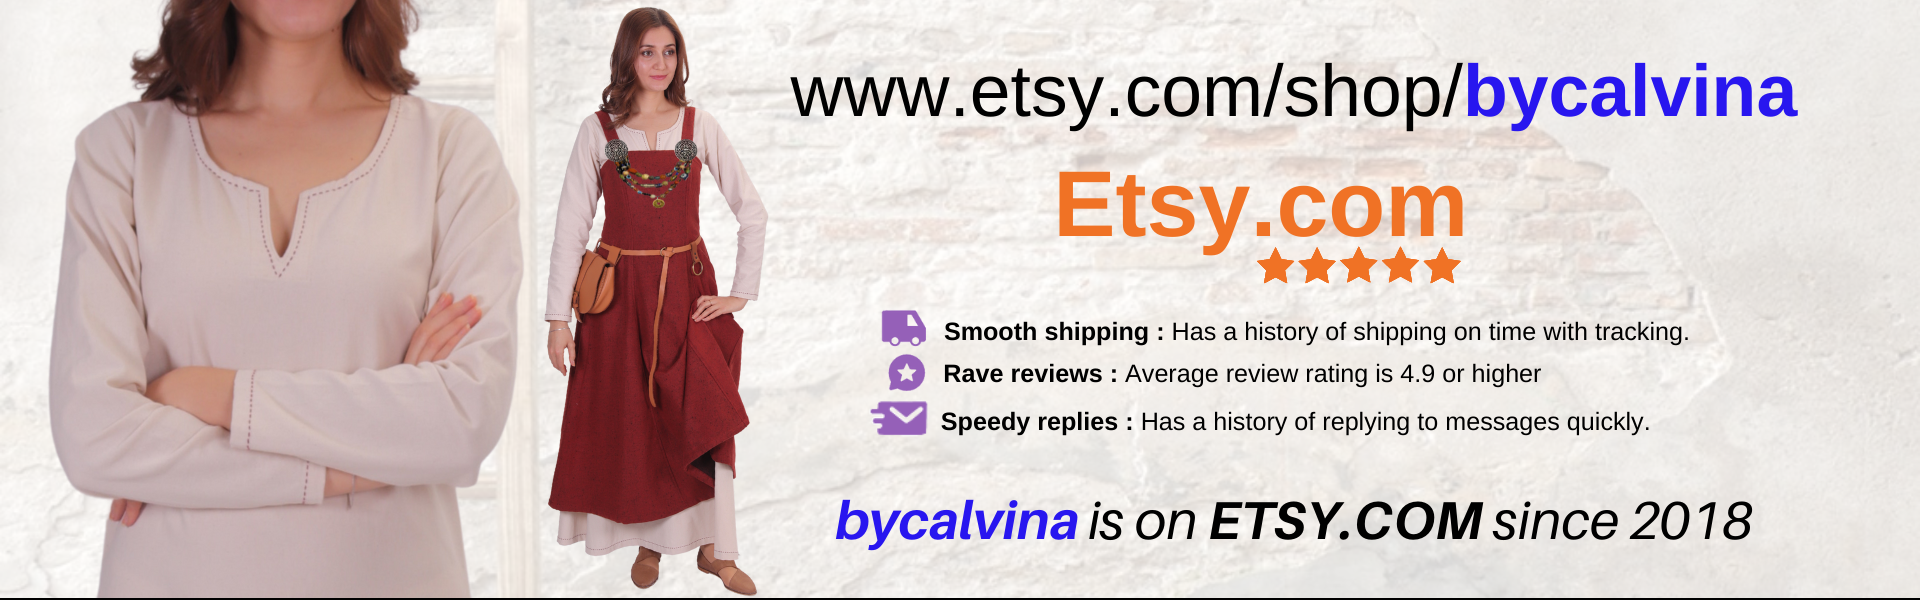 bycalvina is on ETSY.COM since 2018